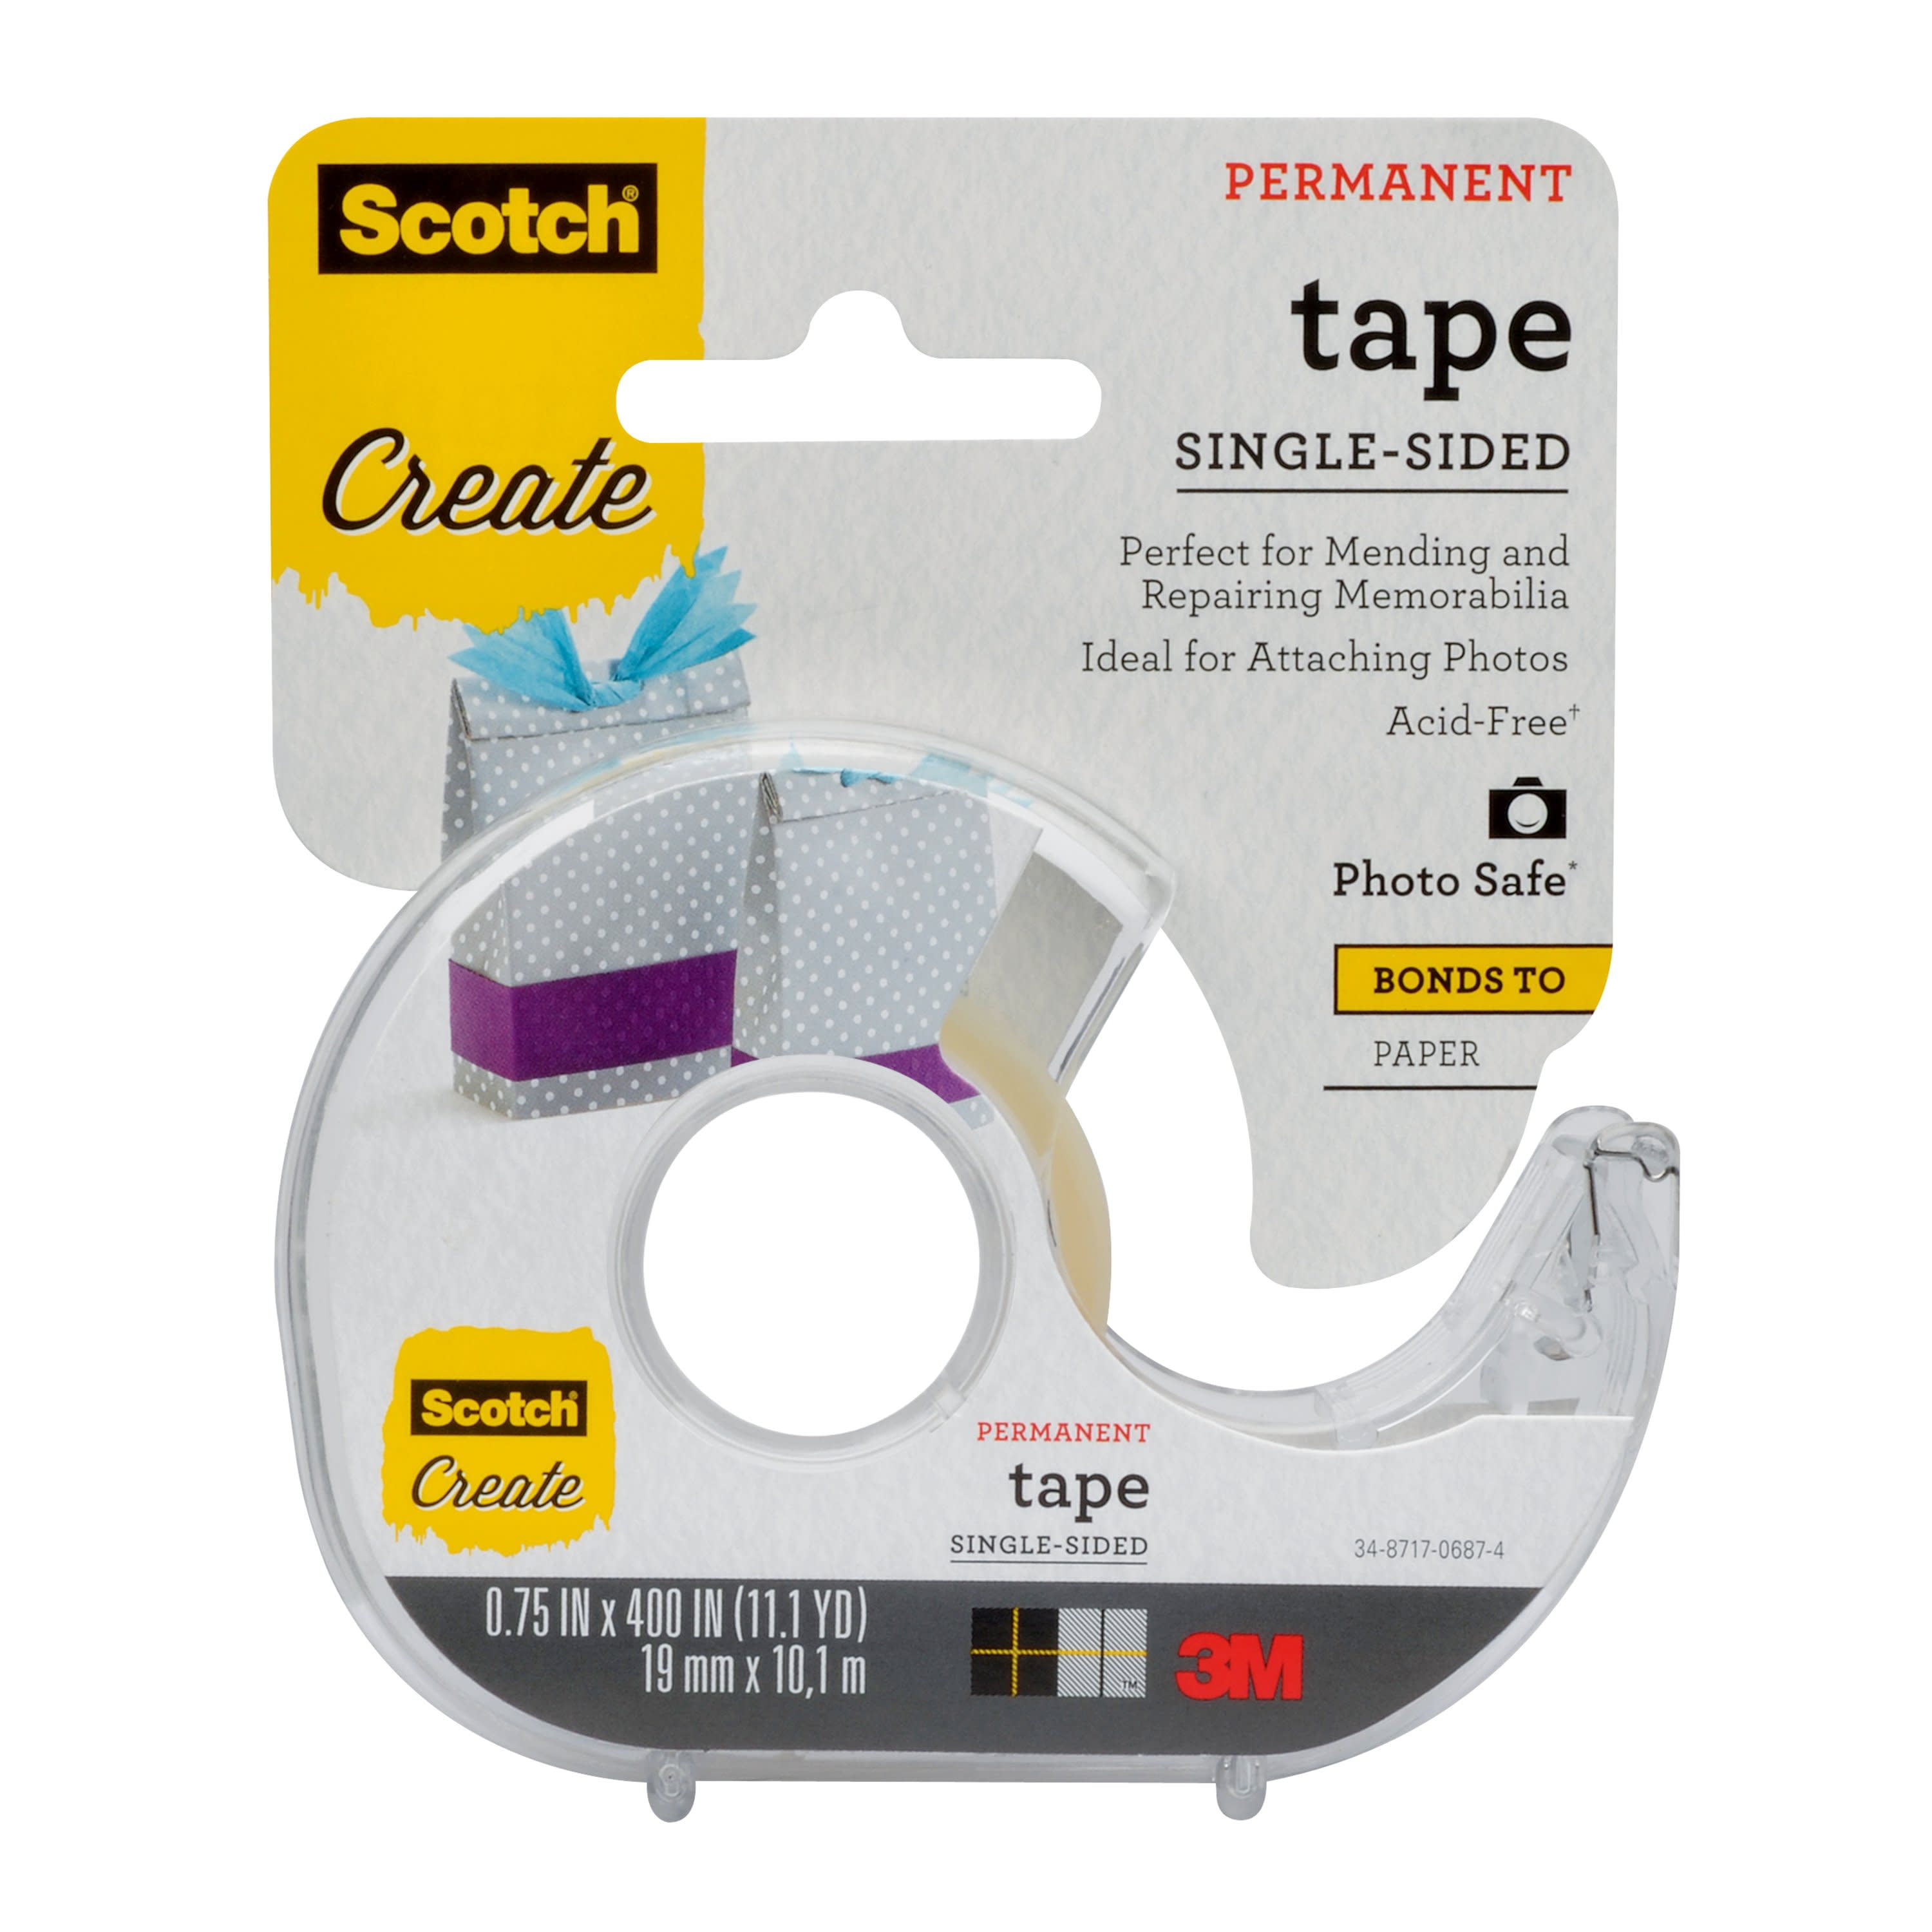 Scotch Single Sided Permanent Tape, Clear, 3/4" x 400", 1 Dispenser